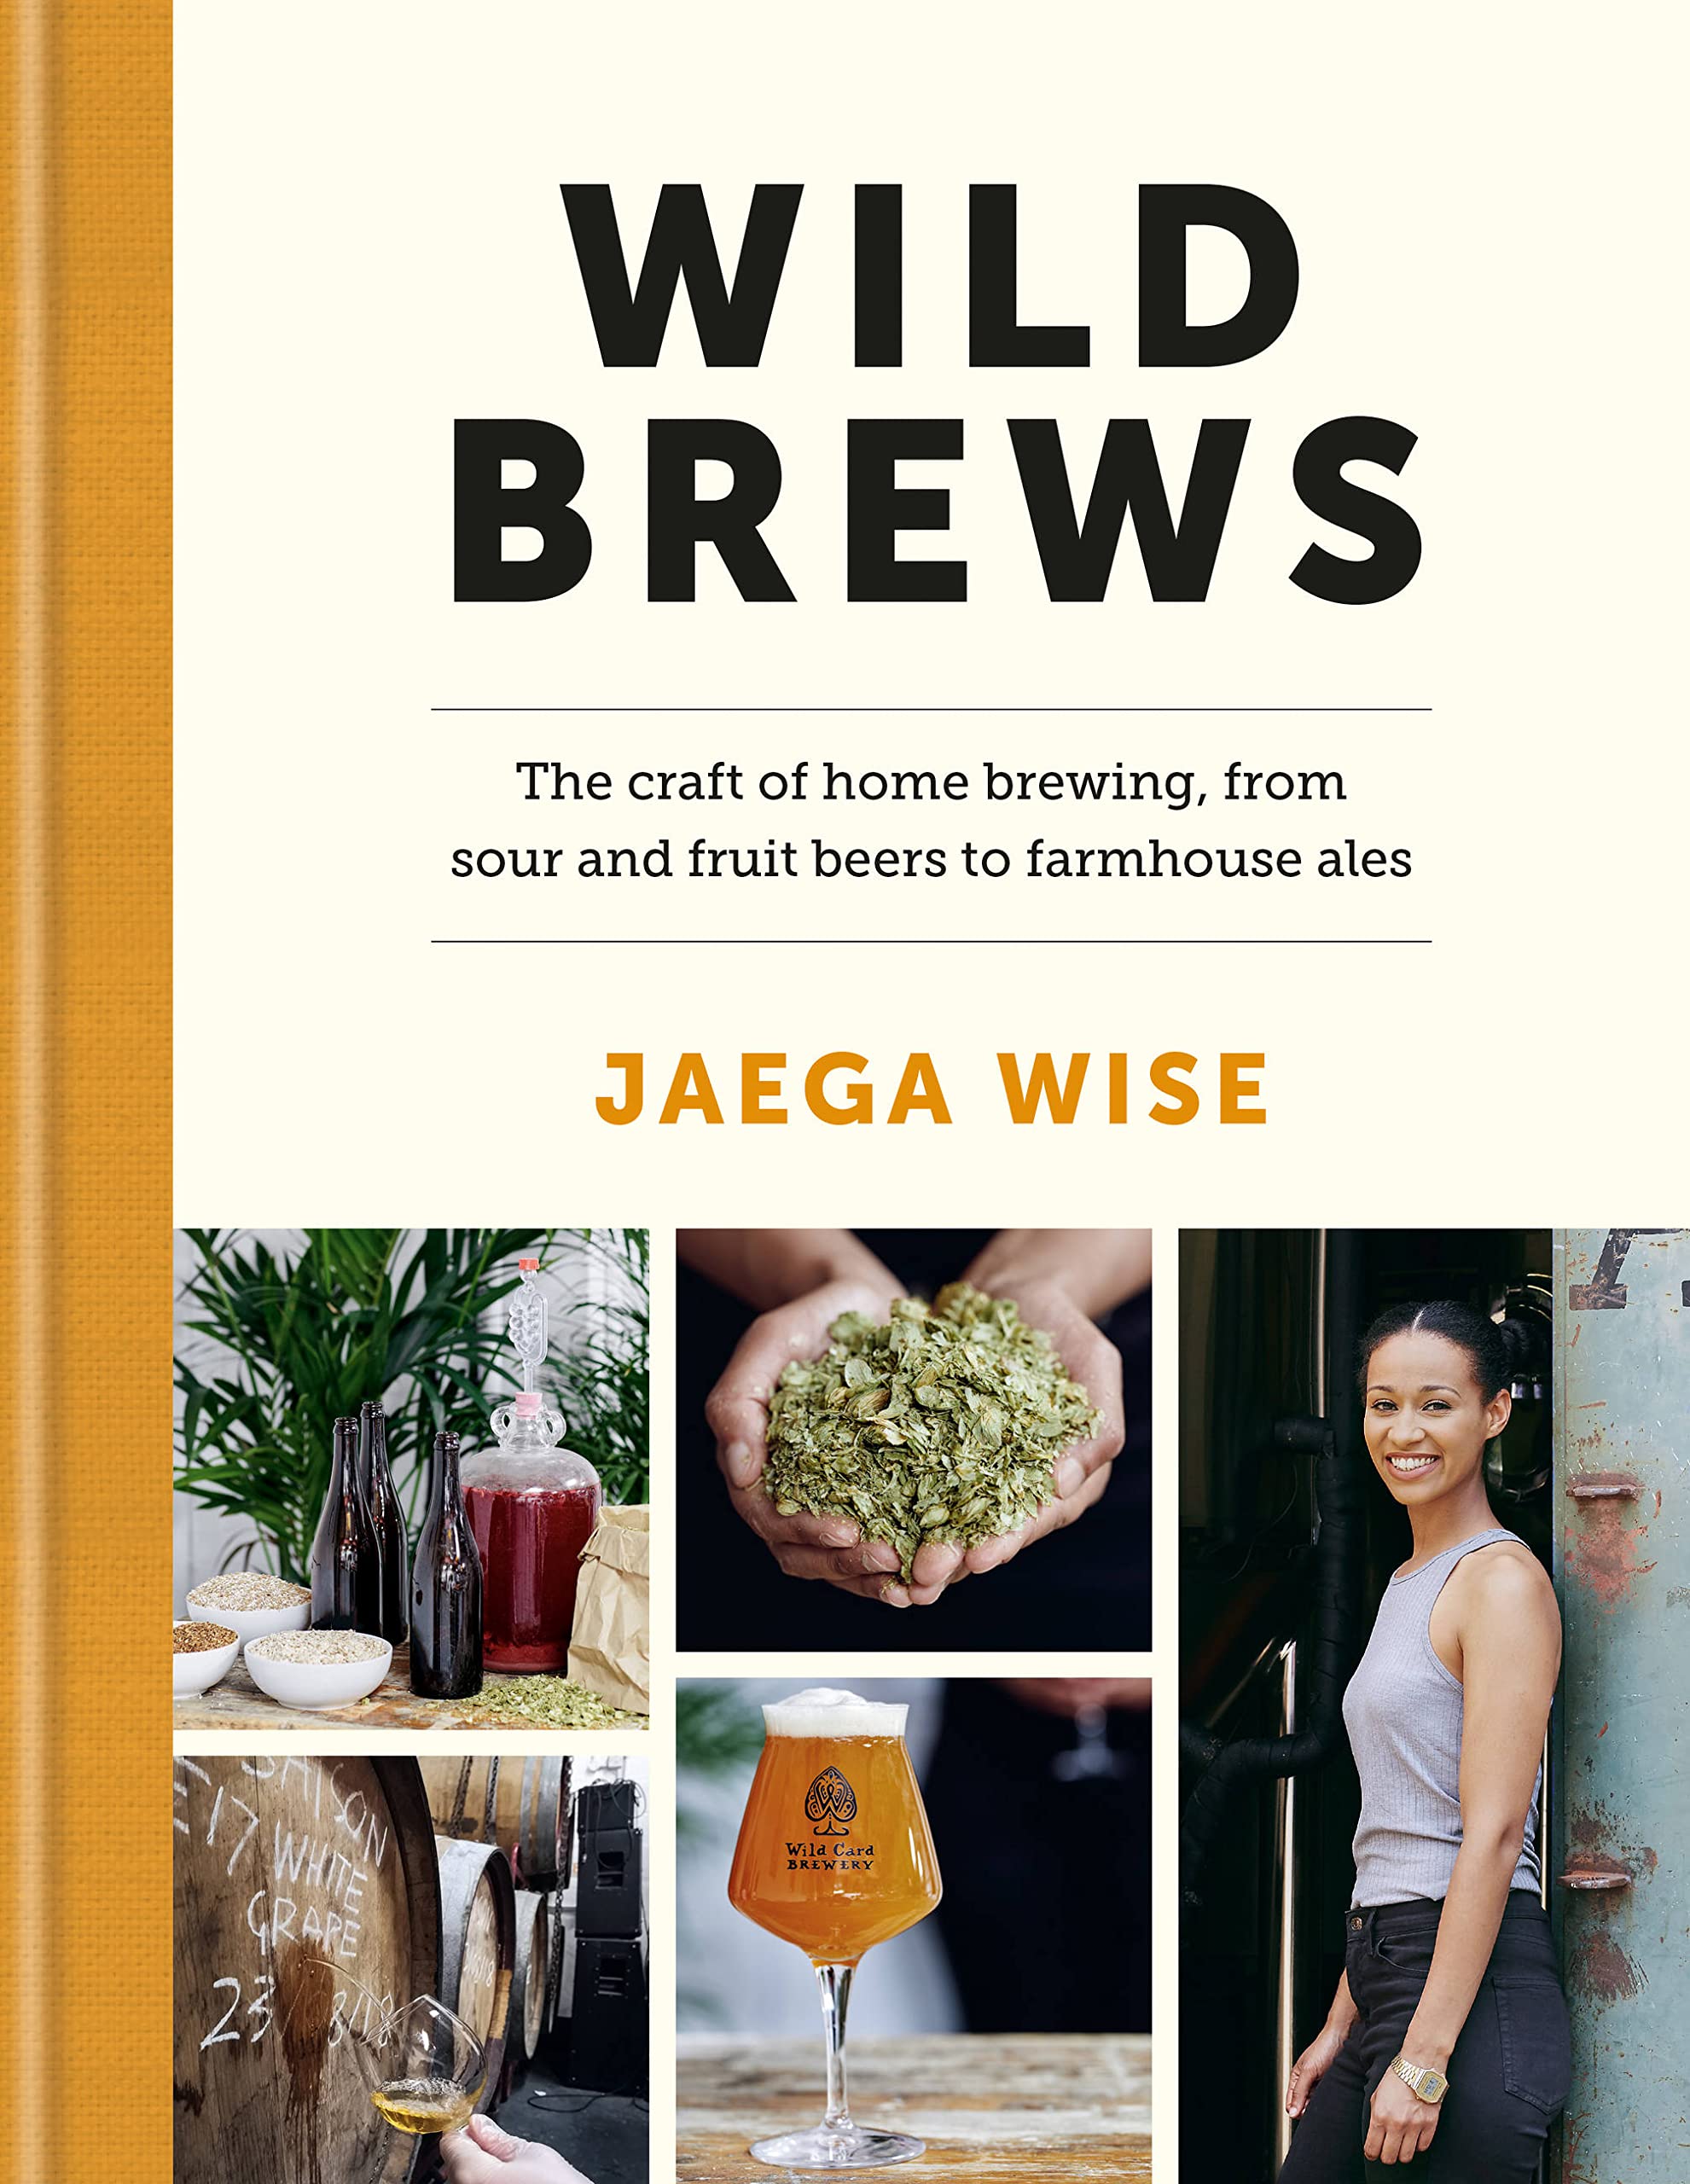 Wild Brews: The craft of home brewing, from sour and fruit beers to farmhouse ales (Jaega Wise)